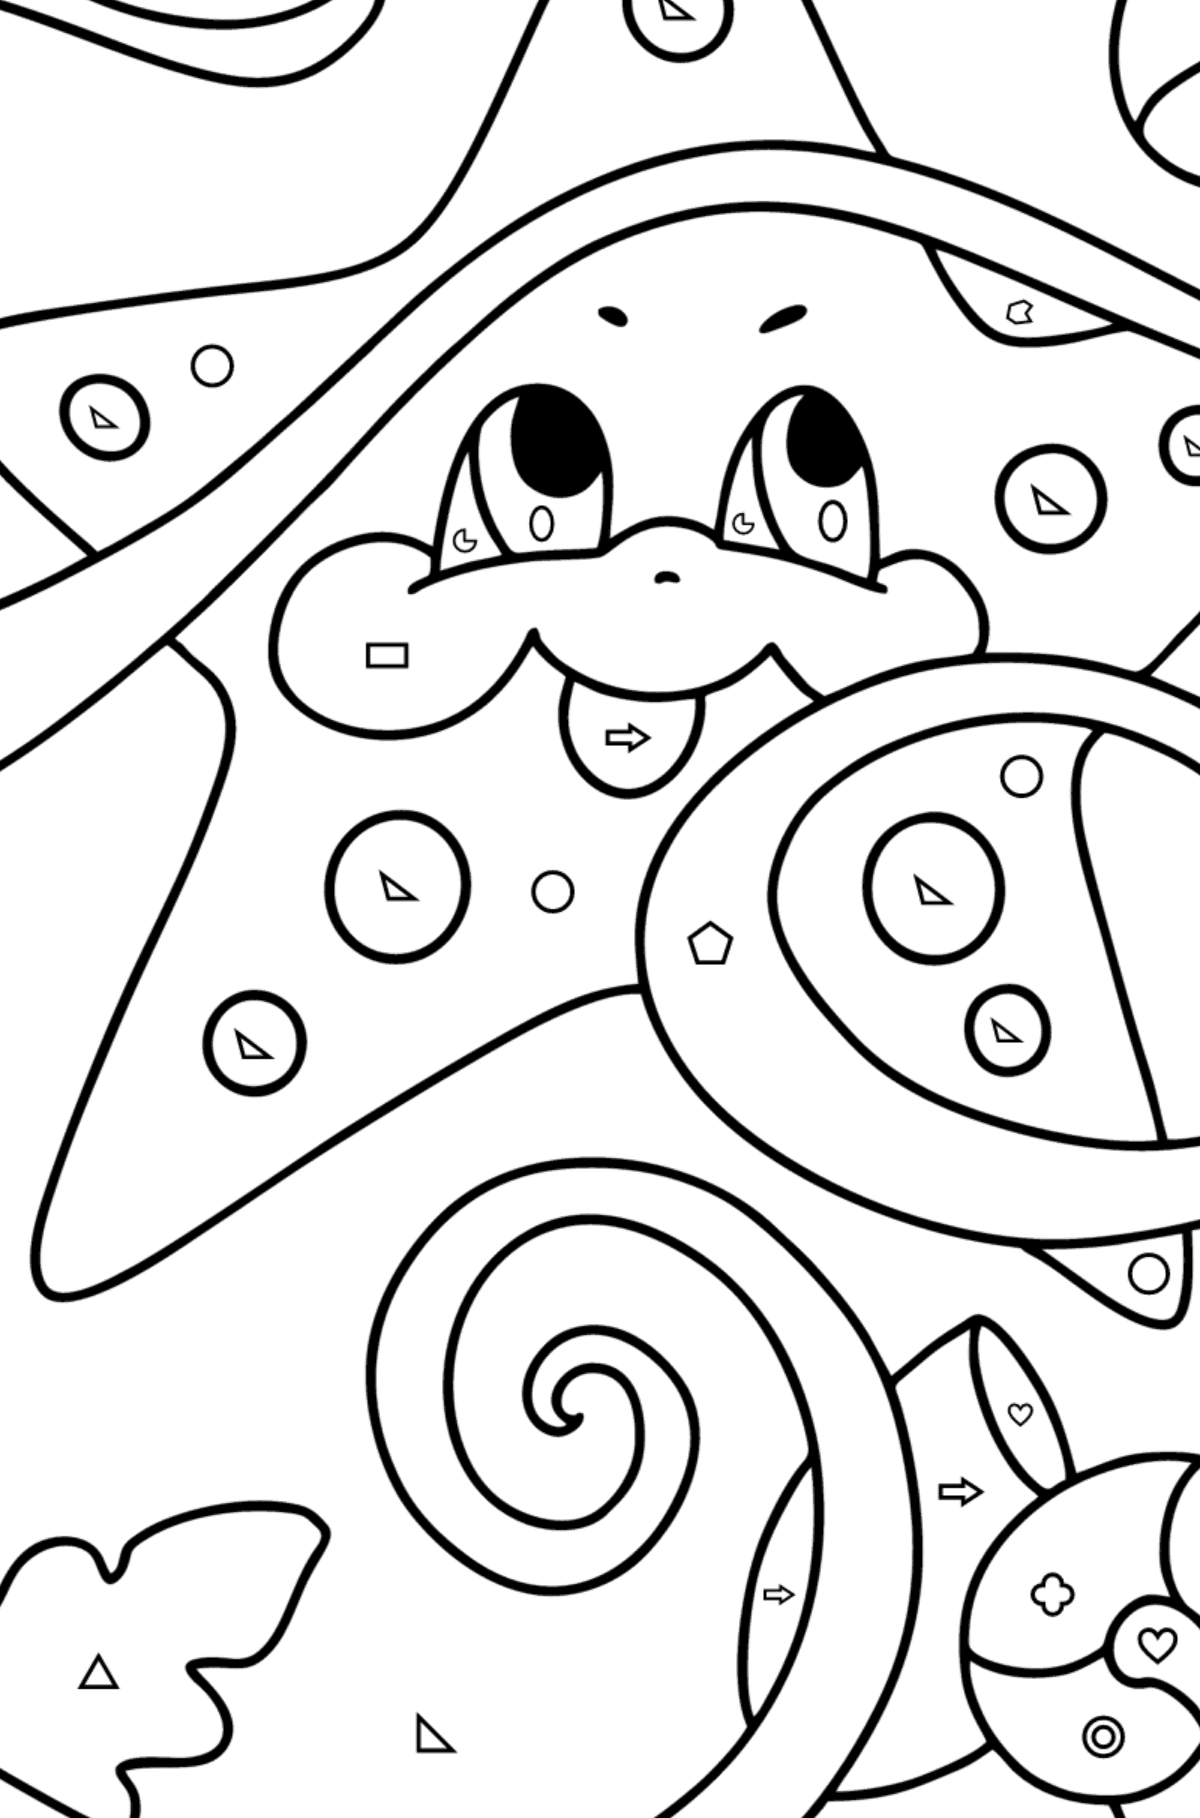 Baby starfish coloring page - Coloring by Geometric Shapes for Kids